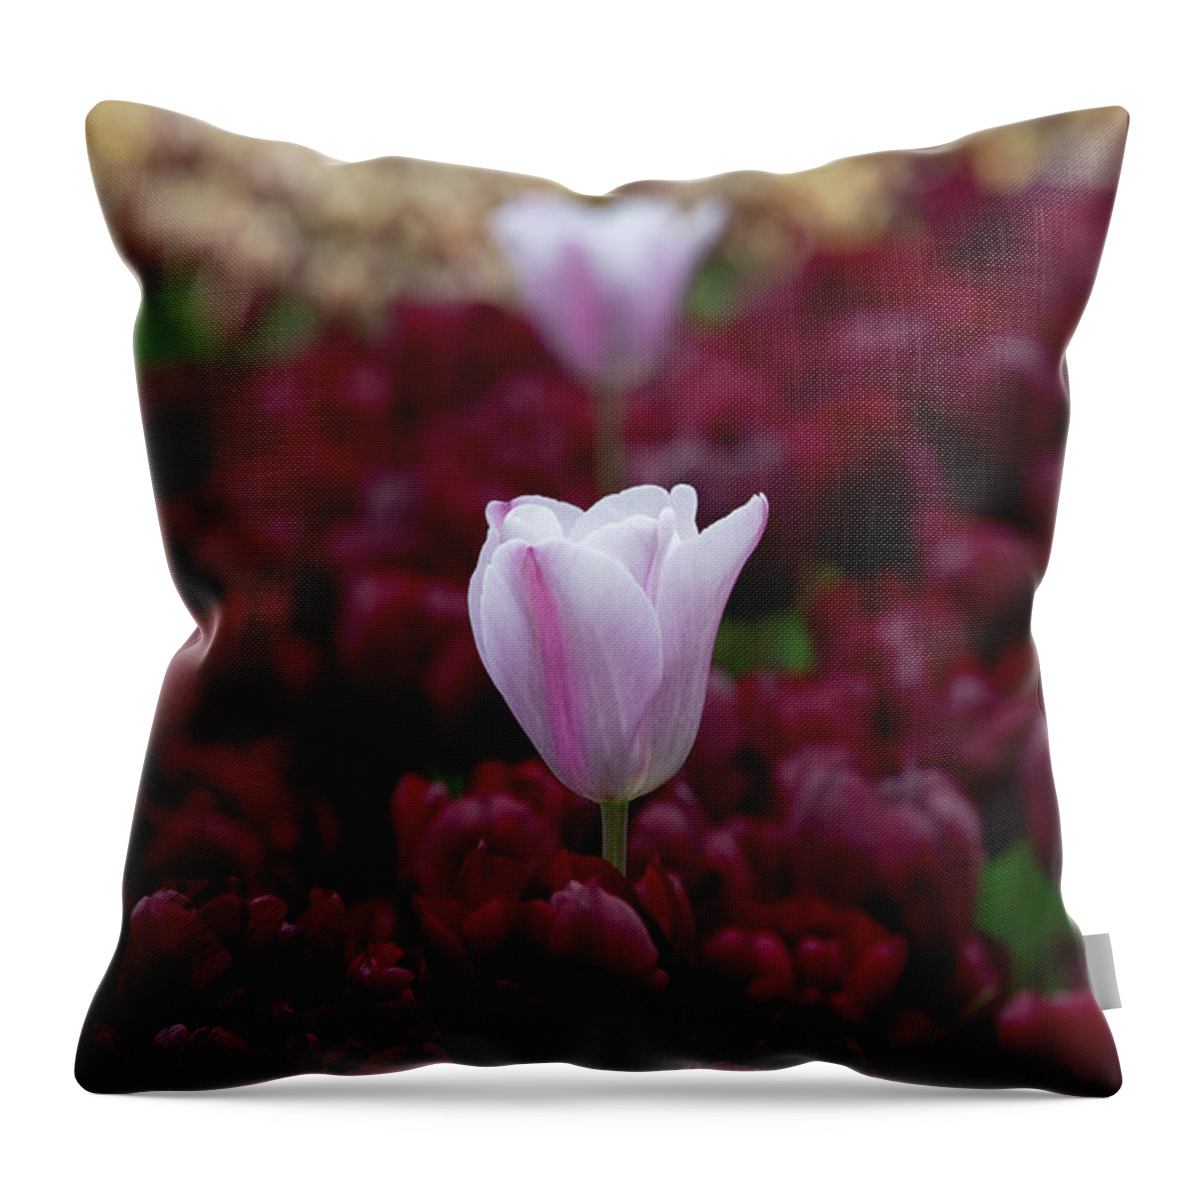 Tulip Throw Pillow featuring the photograph Tulip Mistress Mystic Flower by Tim Gainey